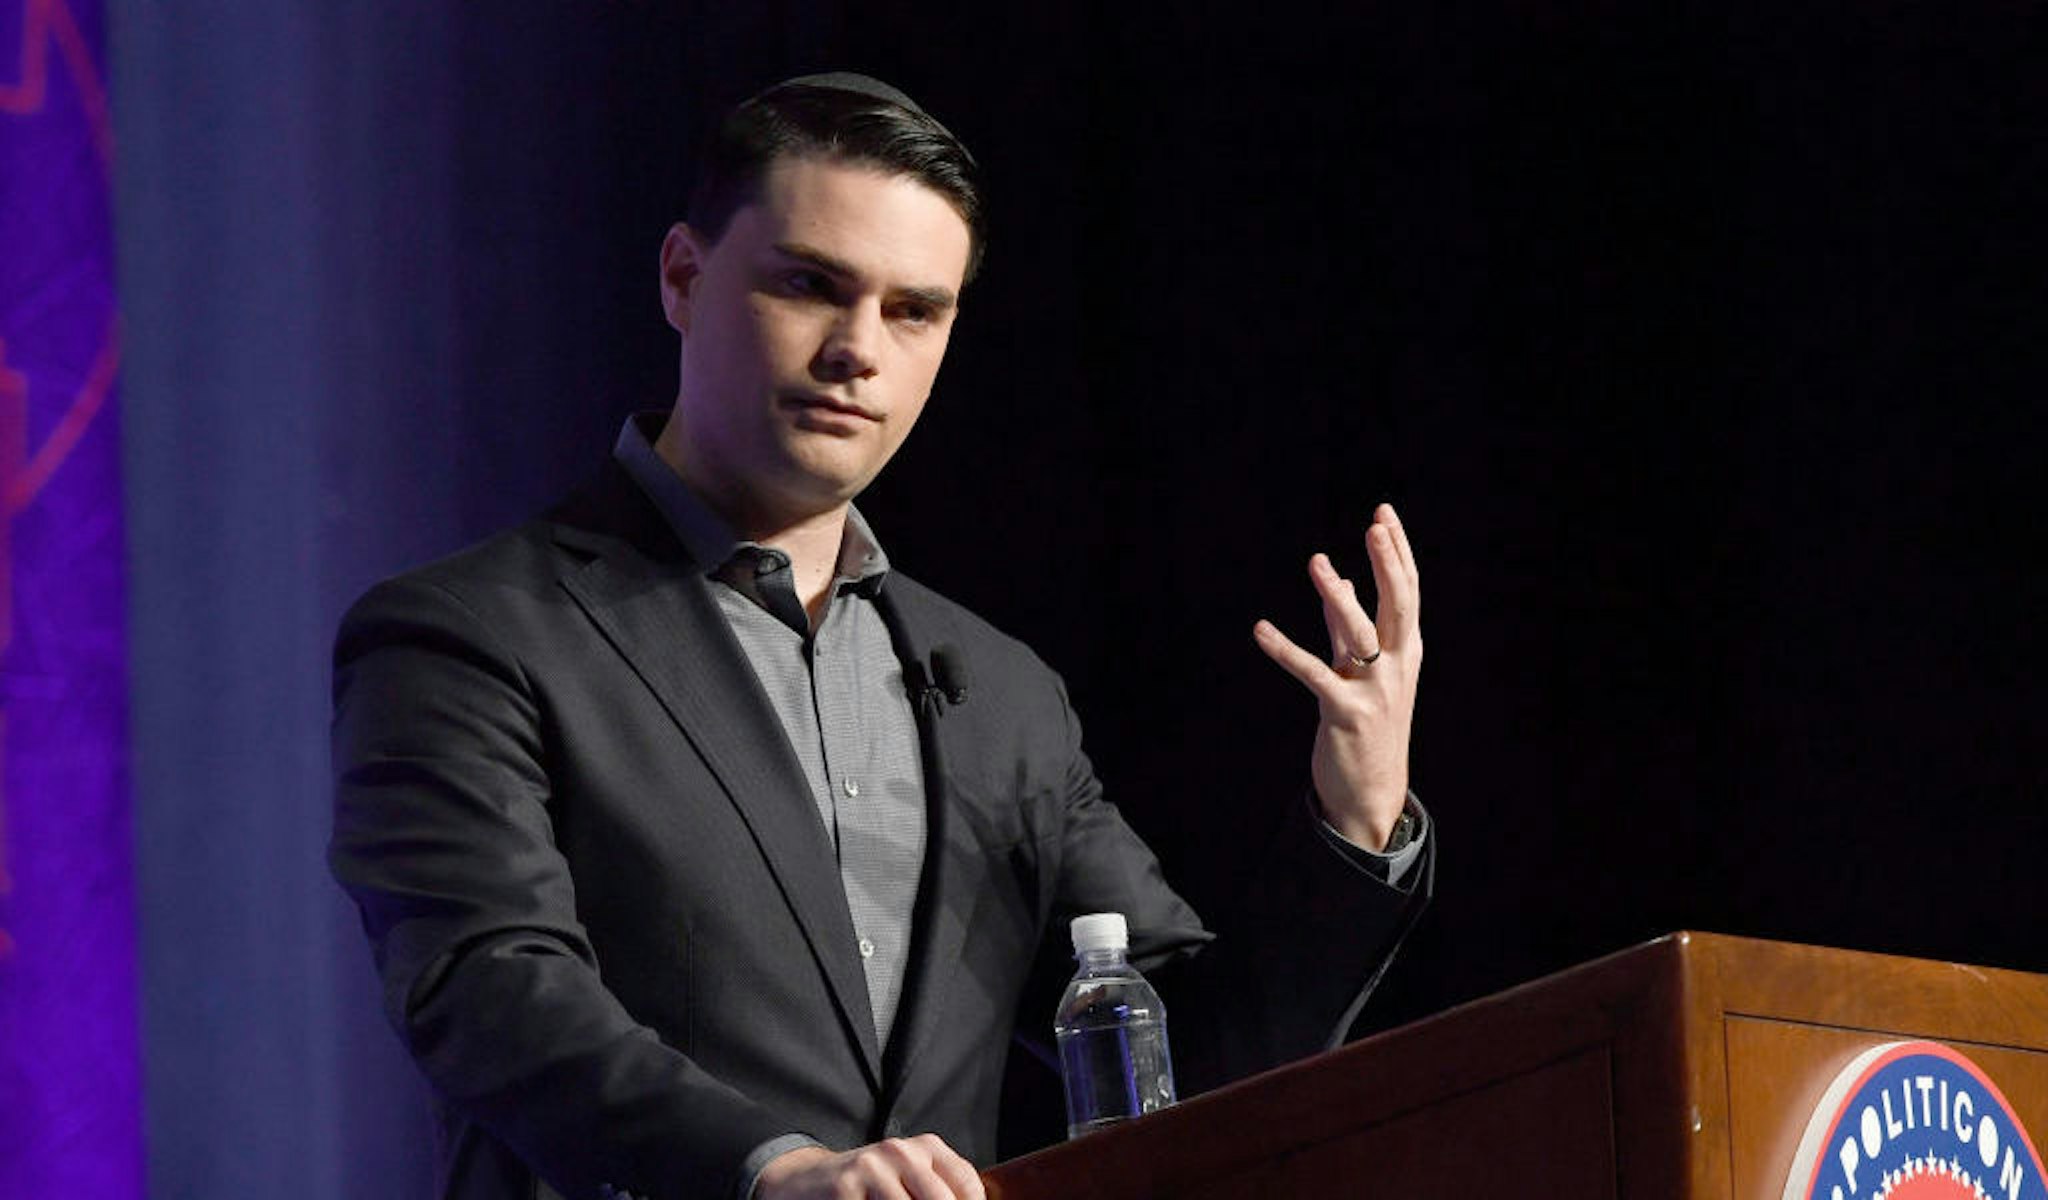 LOS ANGELES, CA - OCTOBER 21: Ben Shapiro speaks onstage at Politicon 2018 at Los Angeles Convention Center on October 21, 2018 in Los Angeles, California. (Photo by Michael S. Schwartz/Getty Images)